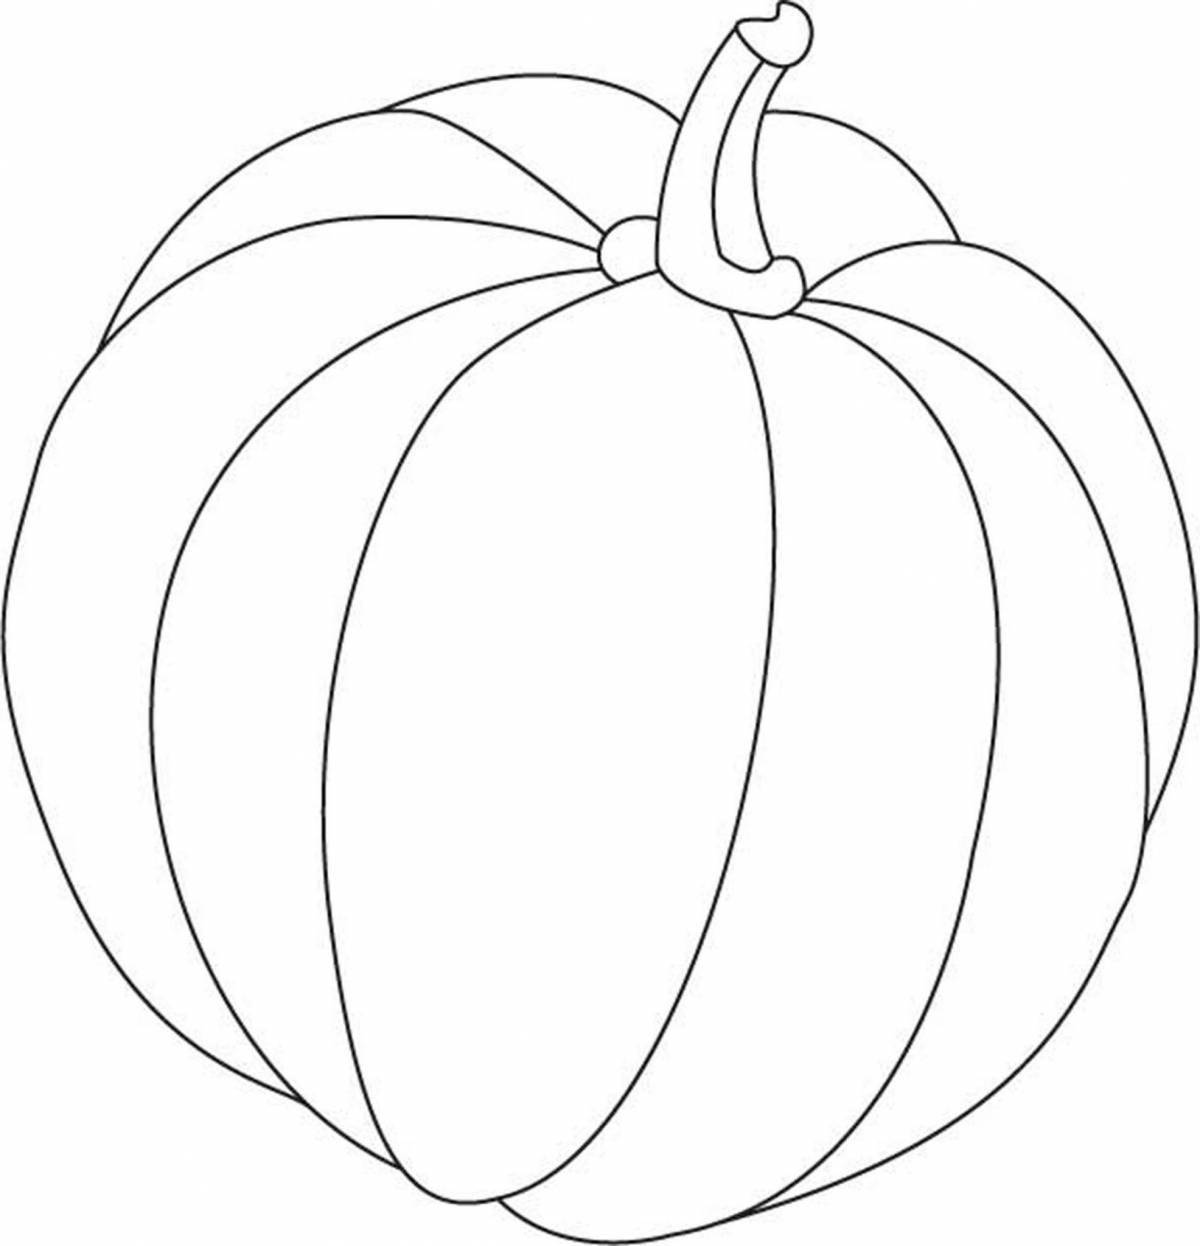 Colorful pumpkin coloring book for kids